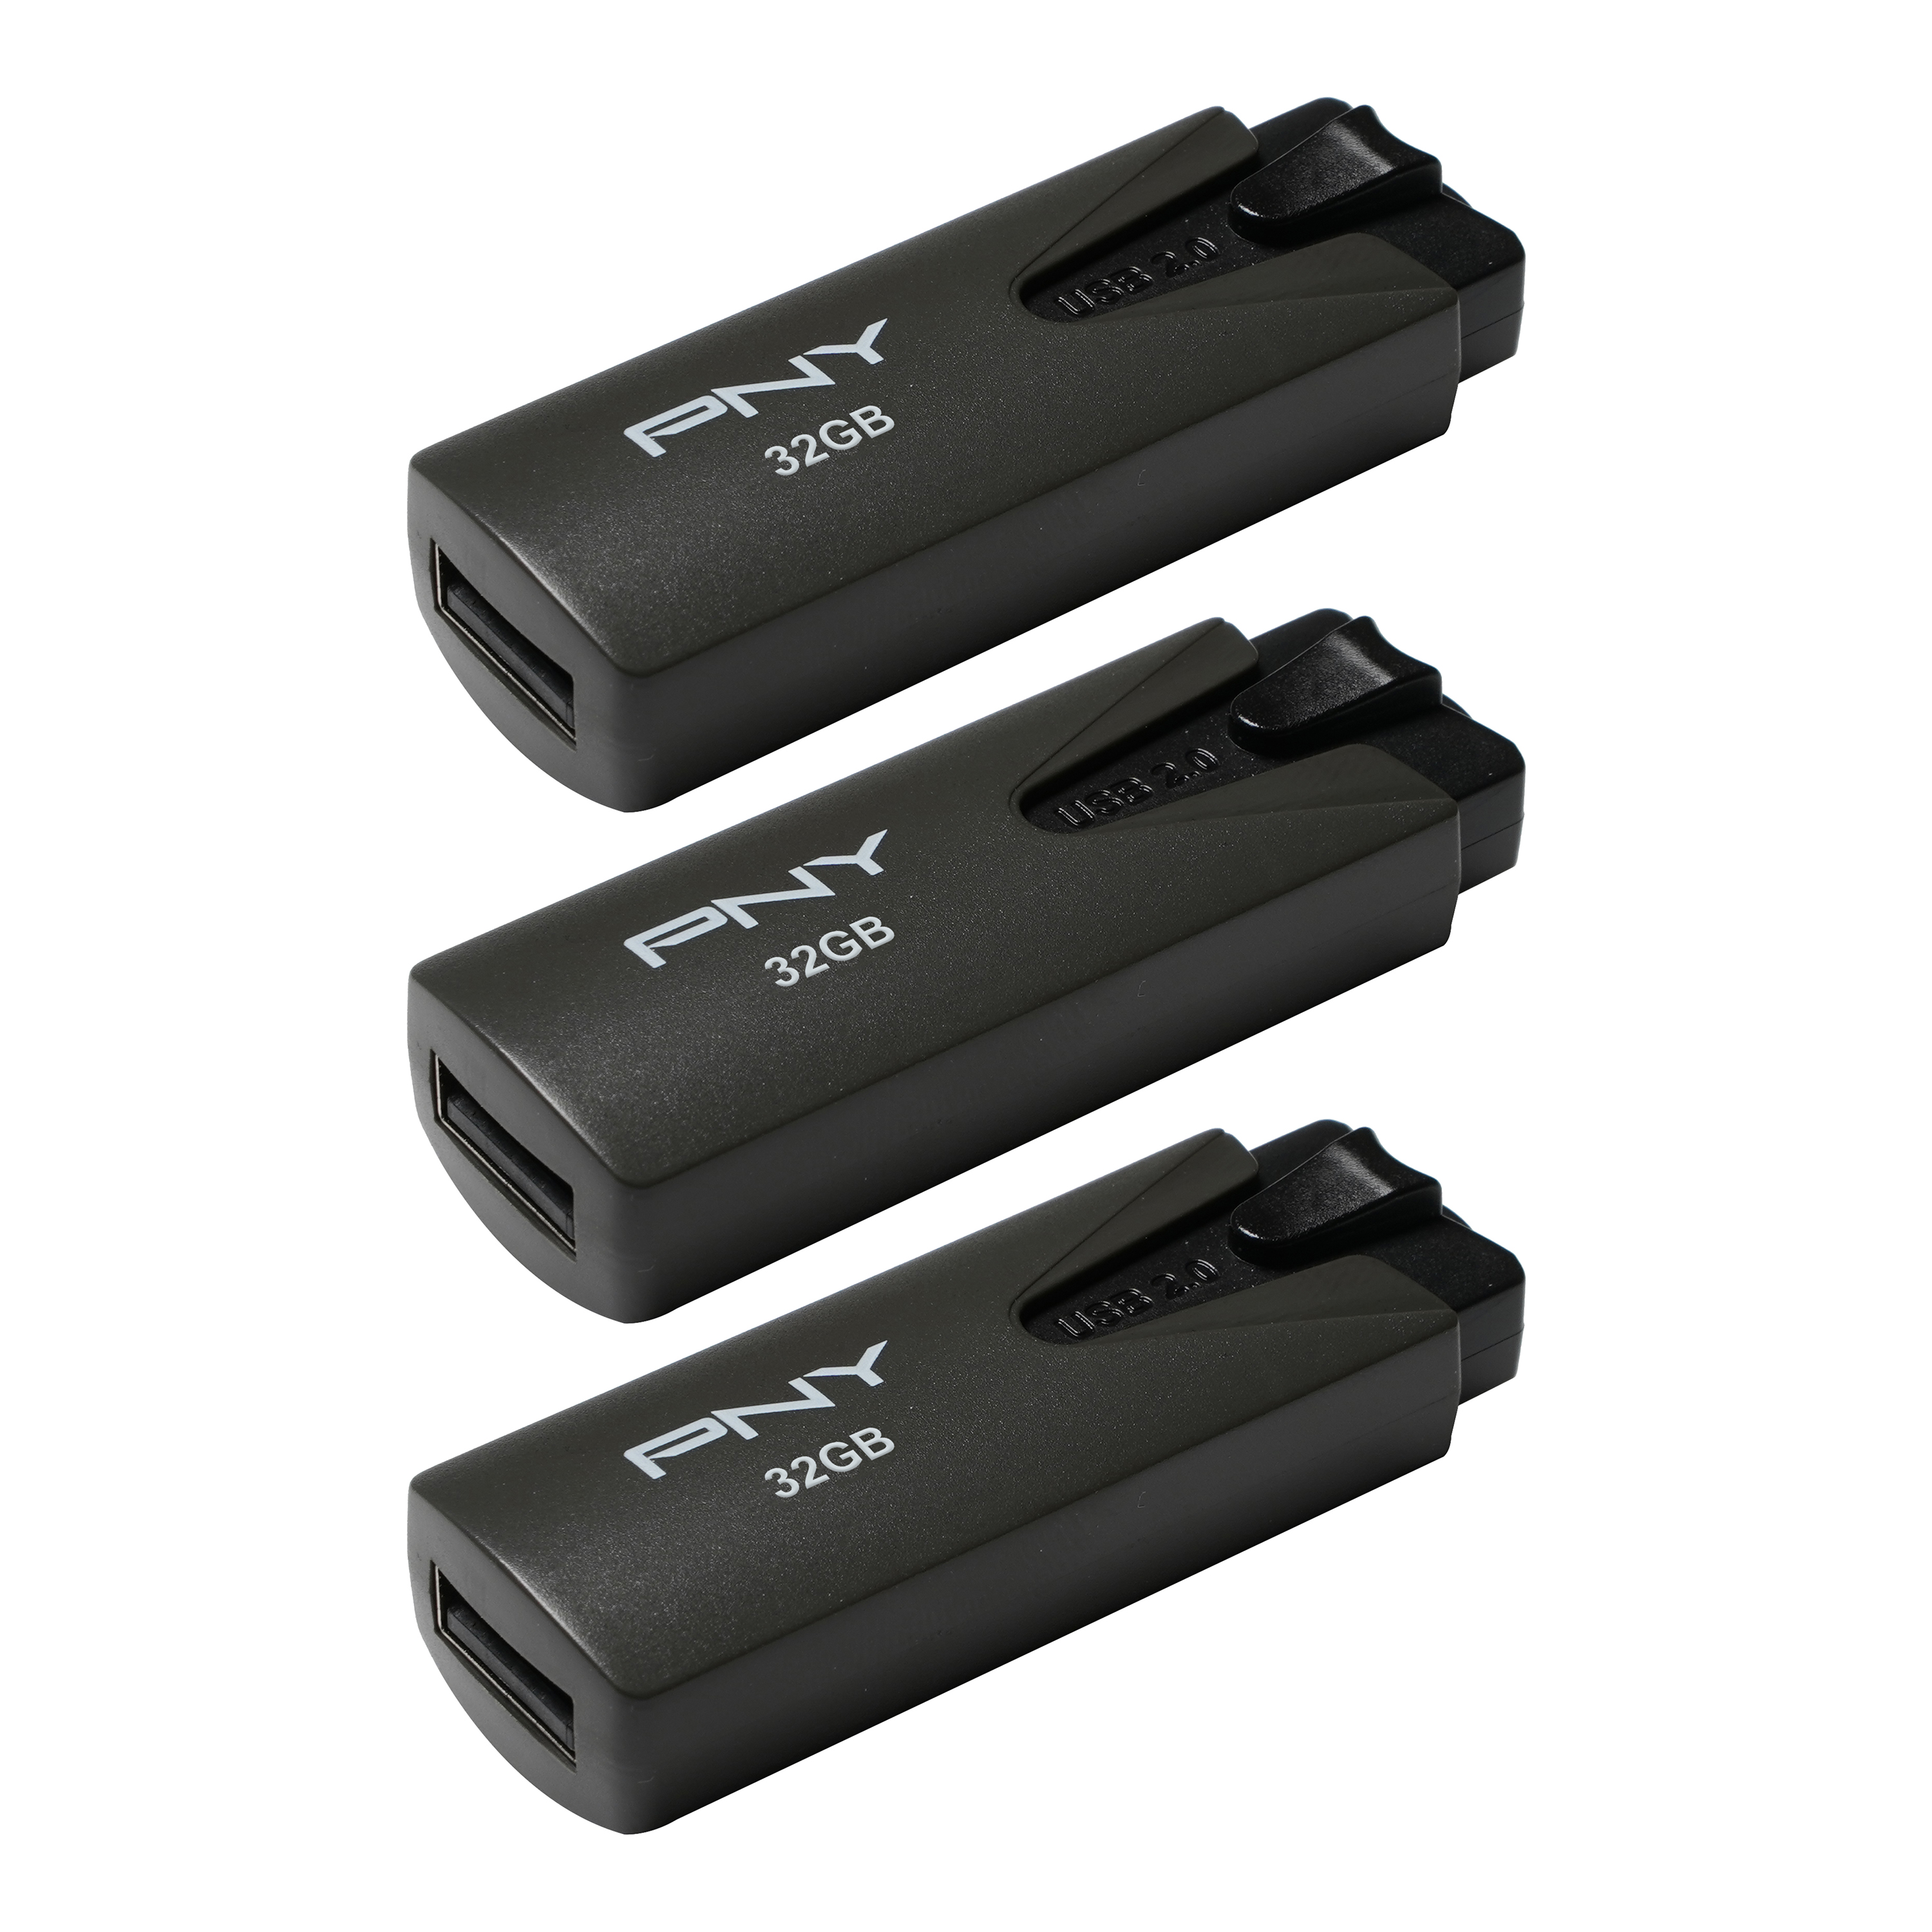 PNY 32GB Attache USB 2.0 Flash Drive, 3-Pack - image 1 of 8